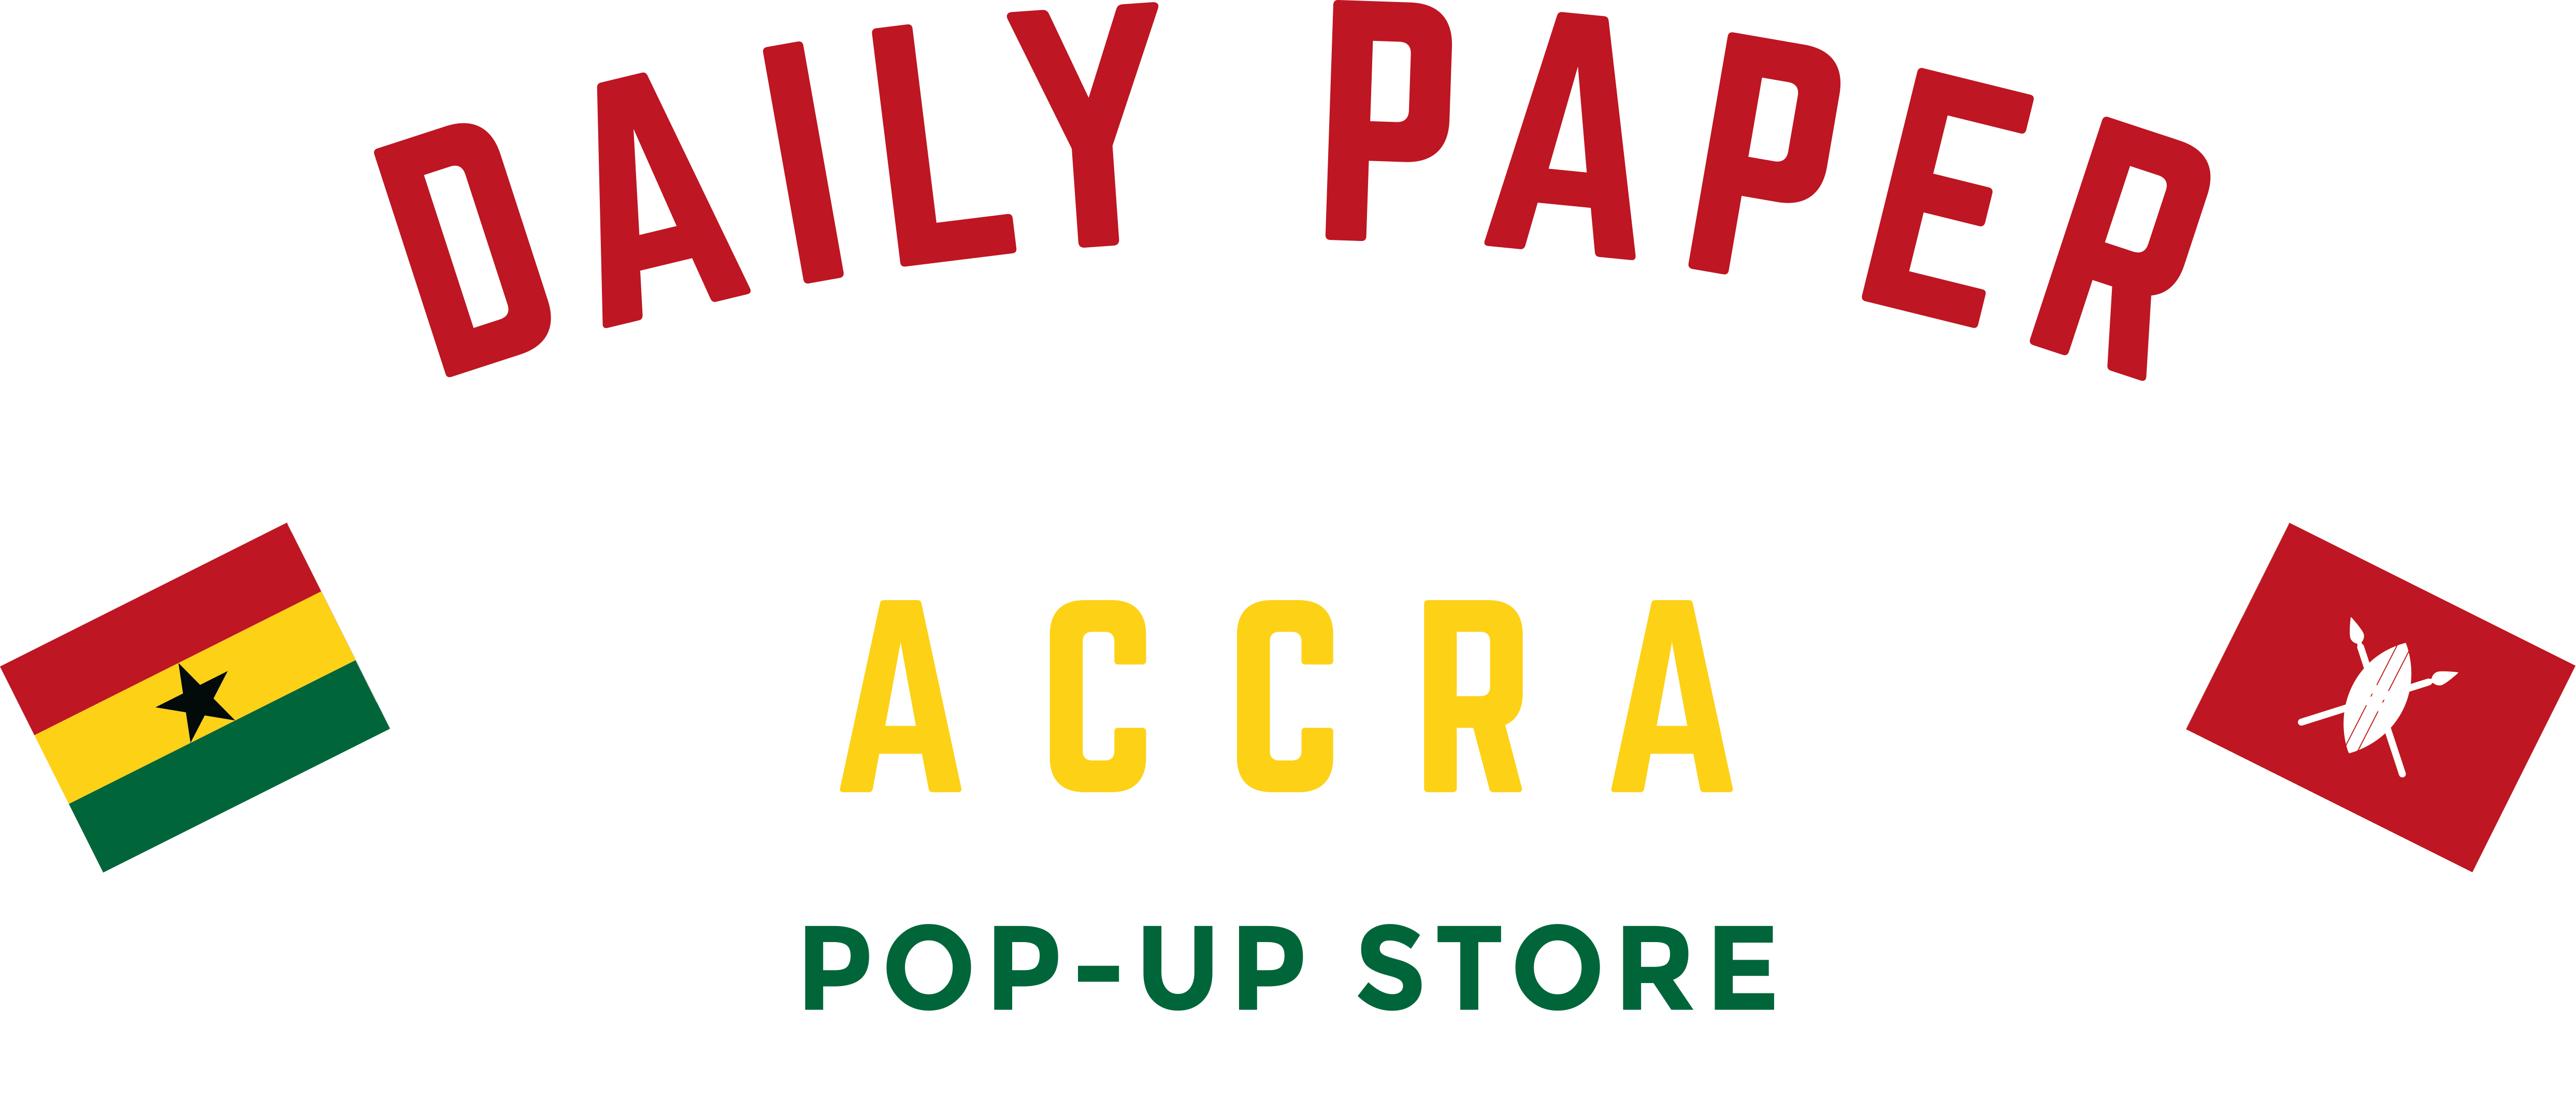 Daily Paper Accra Pop Up Store